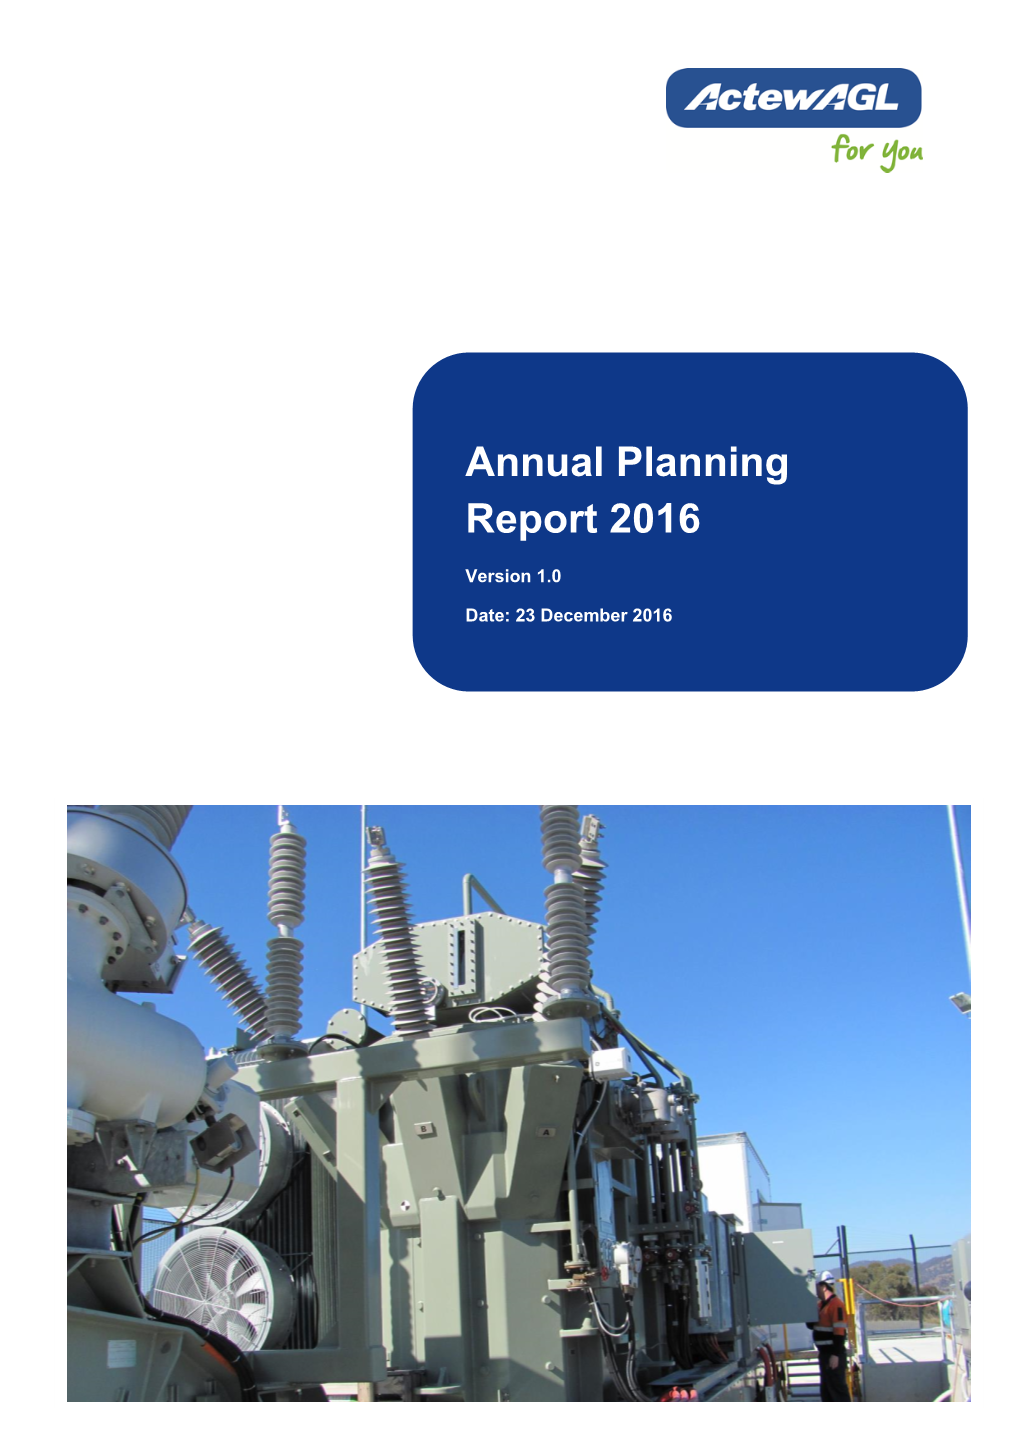 Annual Planning Report 2016